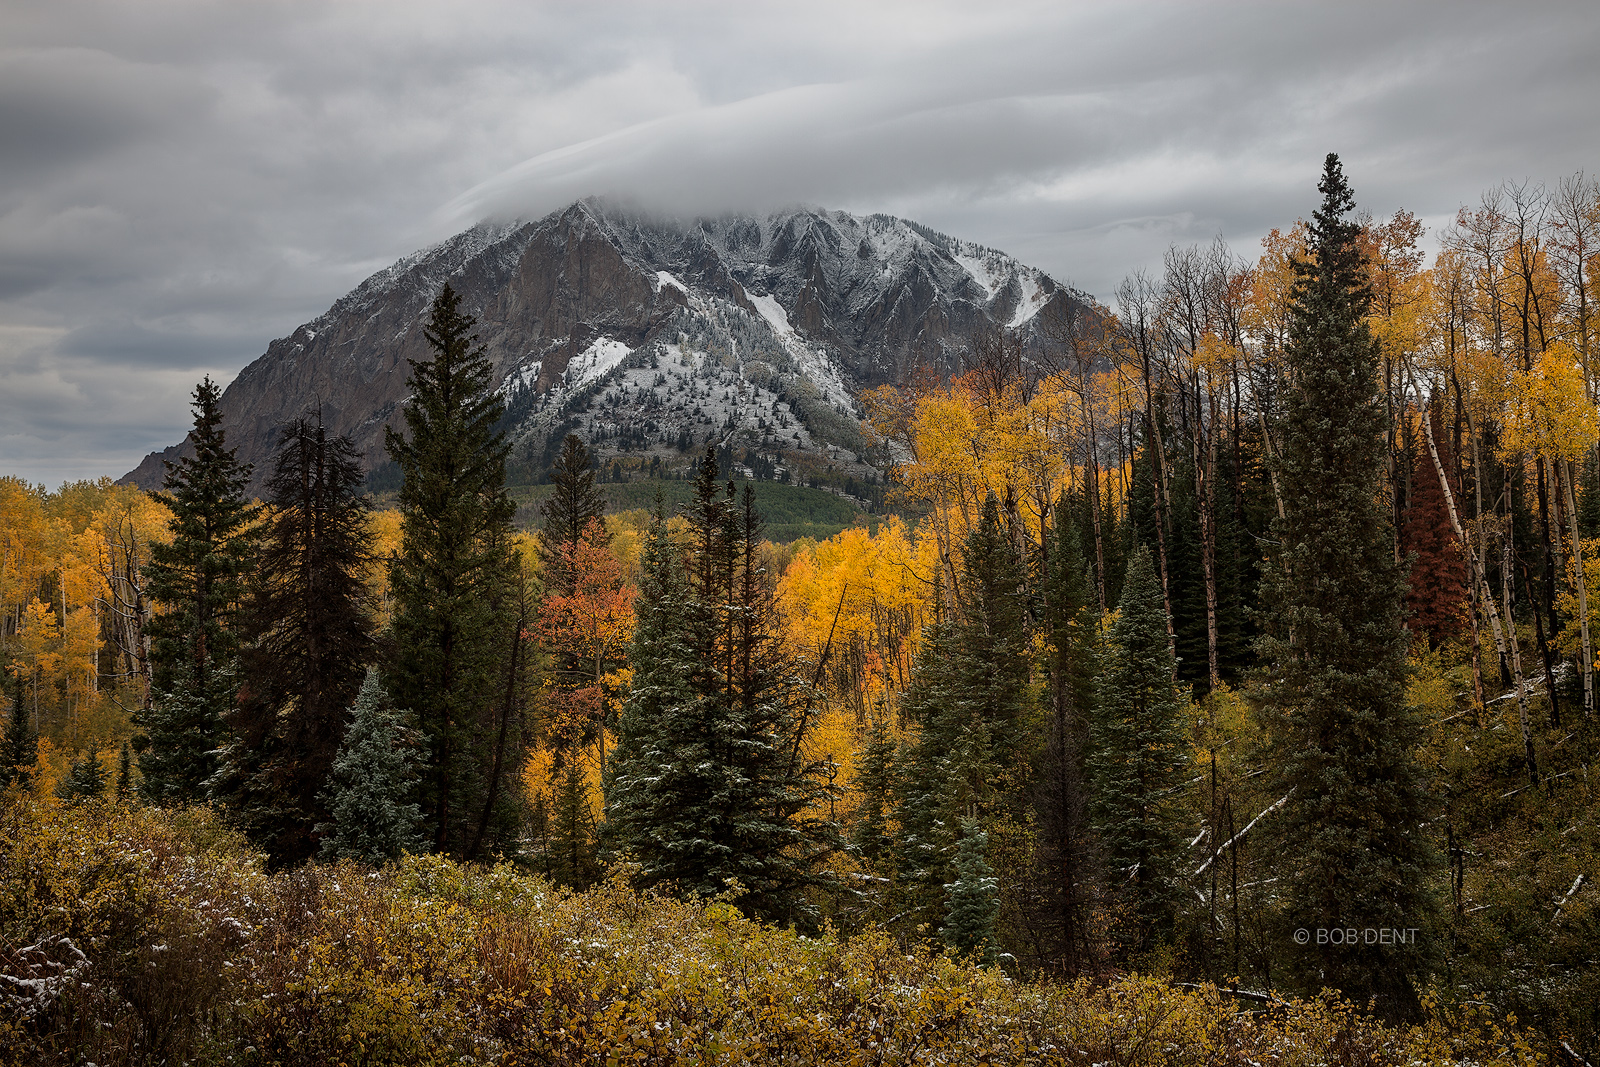 Autumn weather passes over Marcellina Mountain.